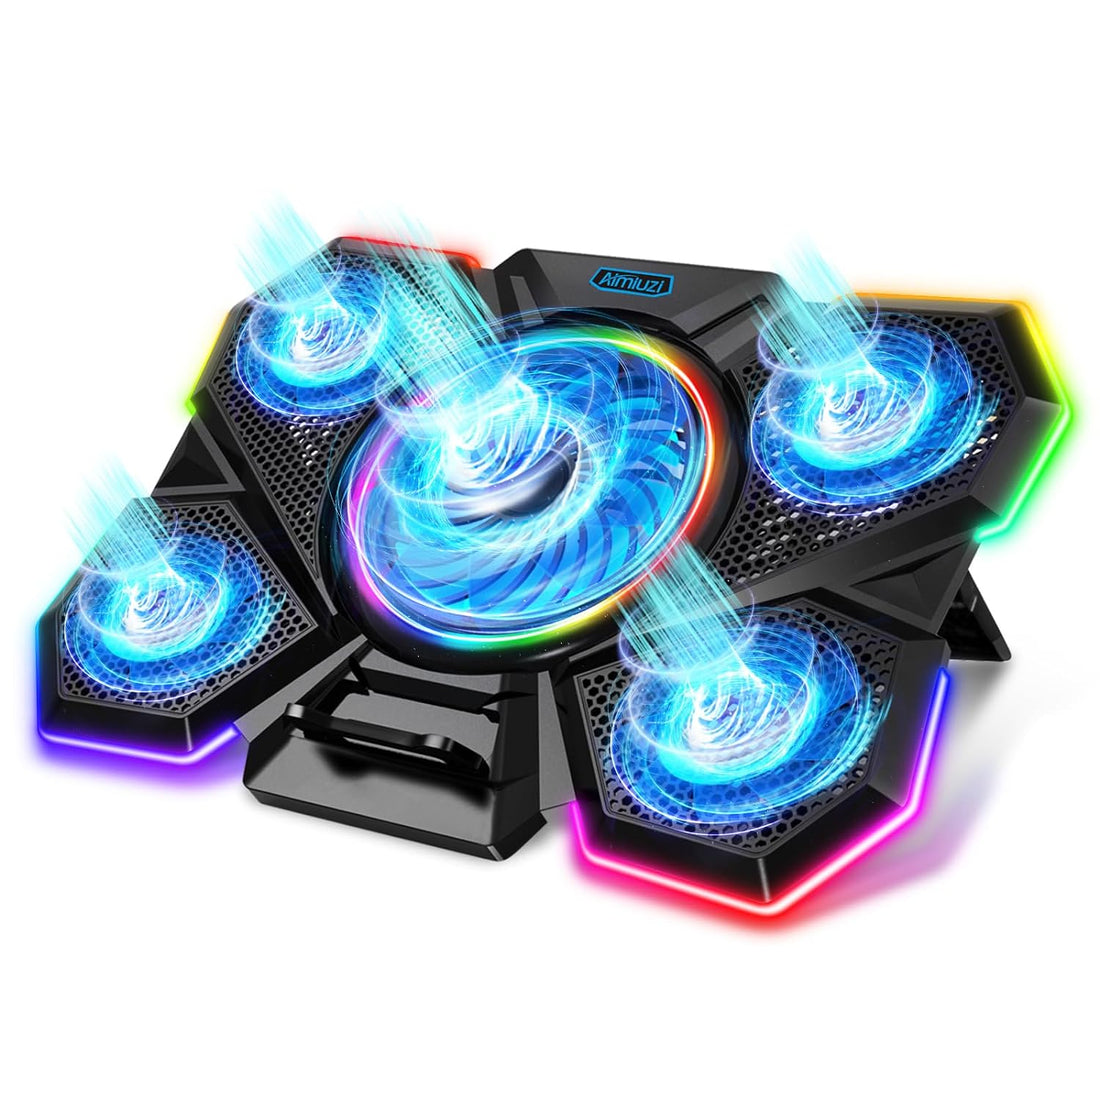 Laptop Cooling Pad, Gaming Laptop Cooler with 5 Quiet Fans and RGB Lights (One-Click Close), Laptop Fan Cooling Pad Fits 12-17 Inch Laptop, 2 USB Ports, 7 Adjustable Height